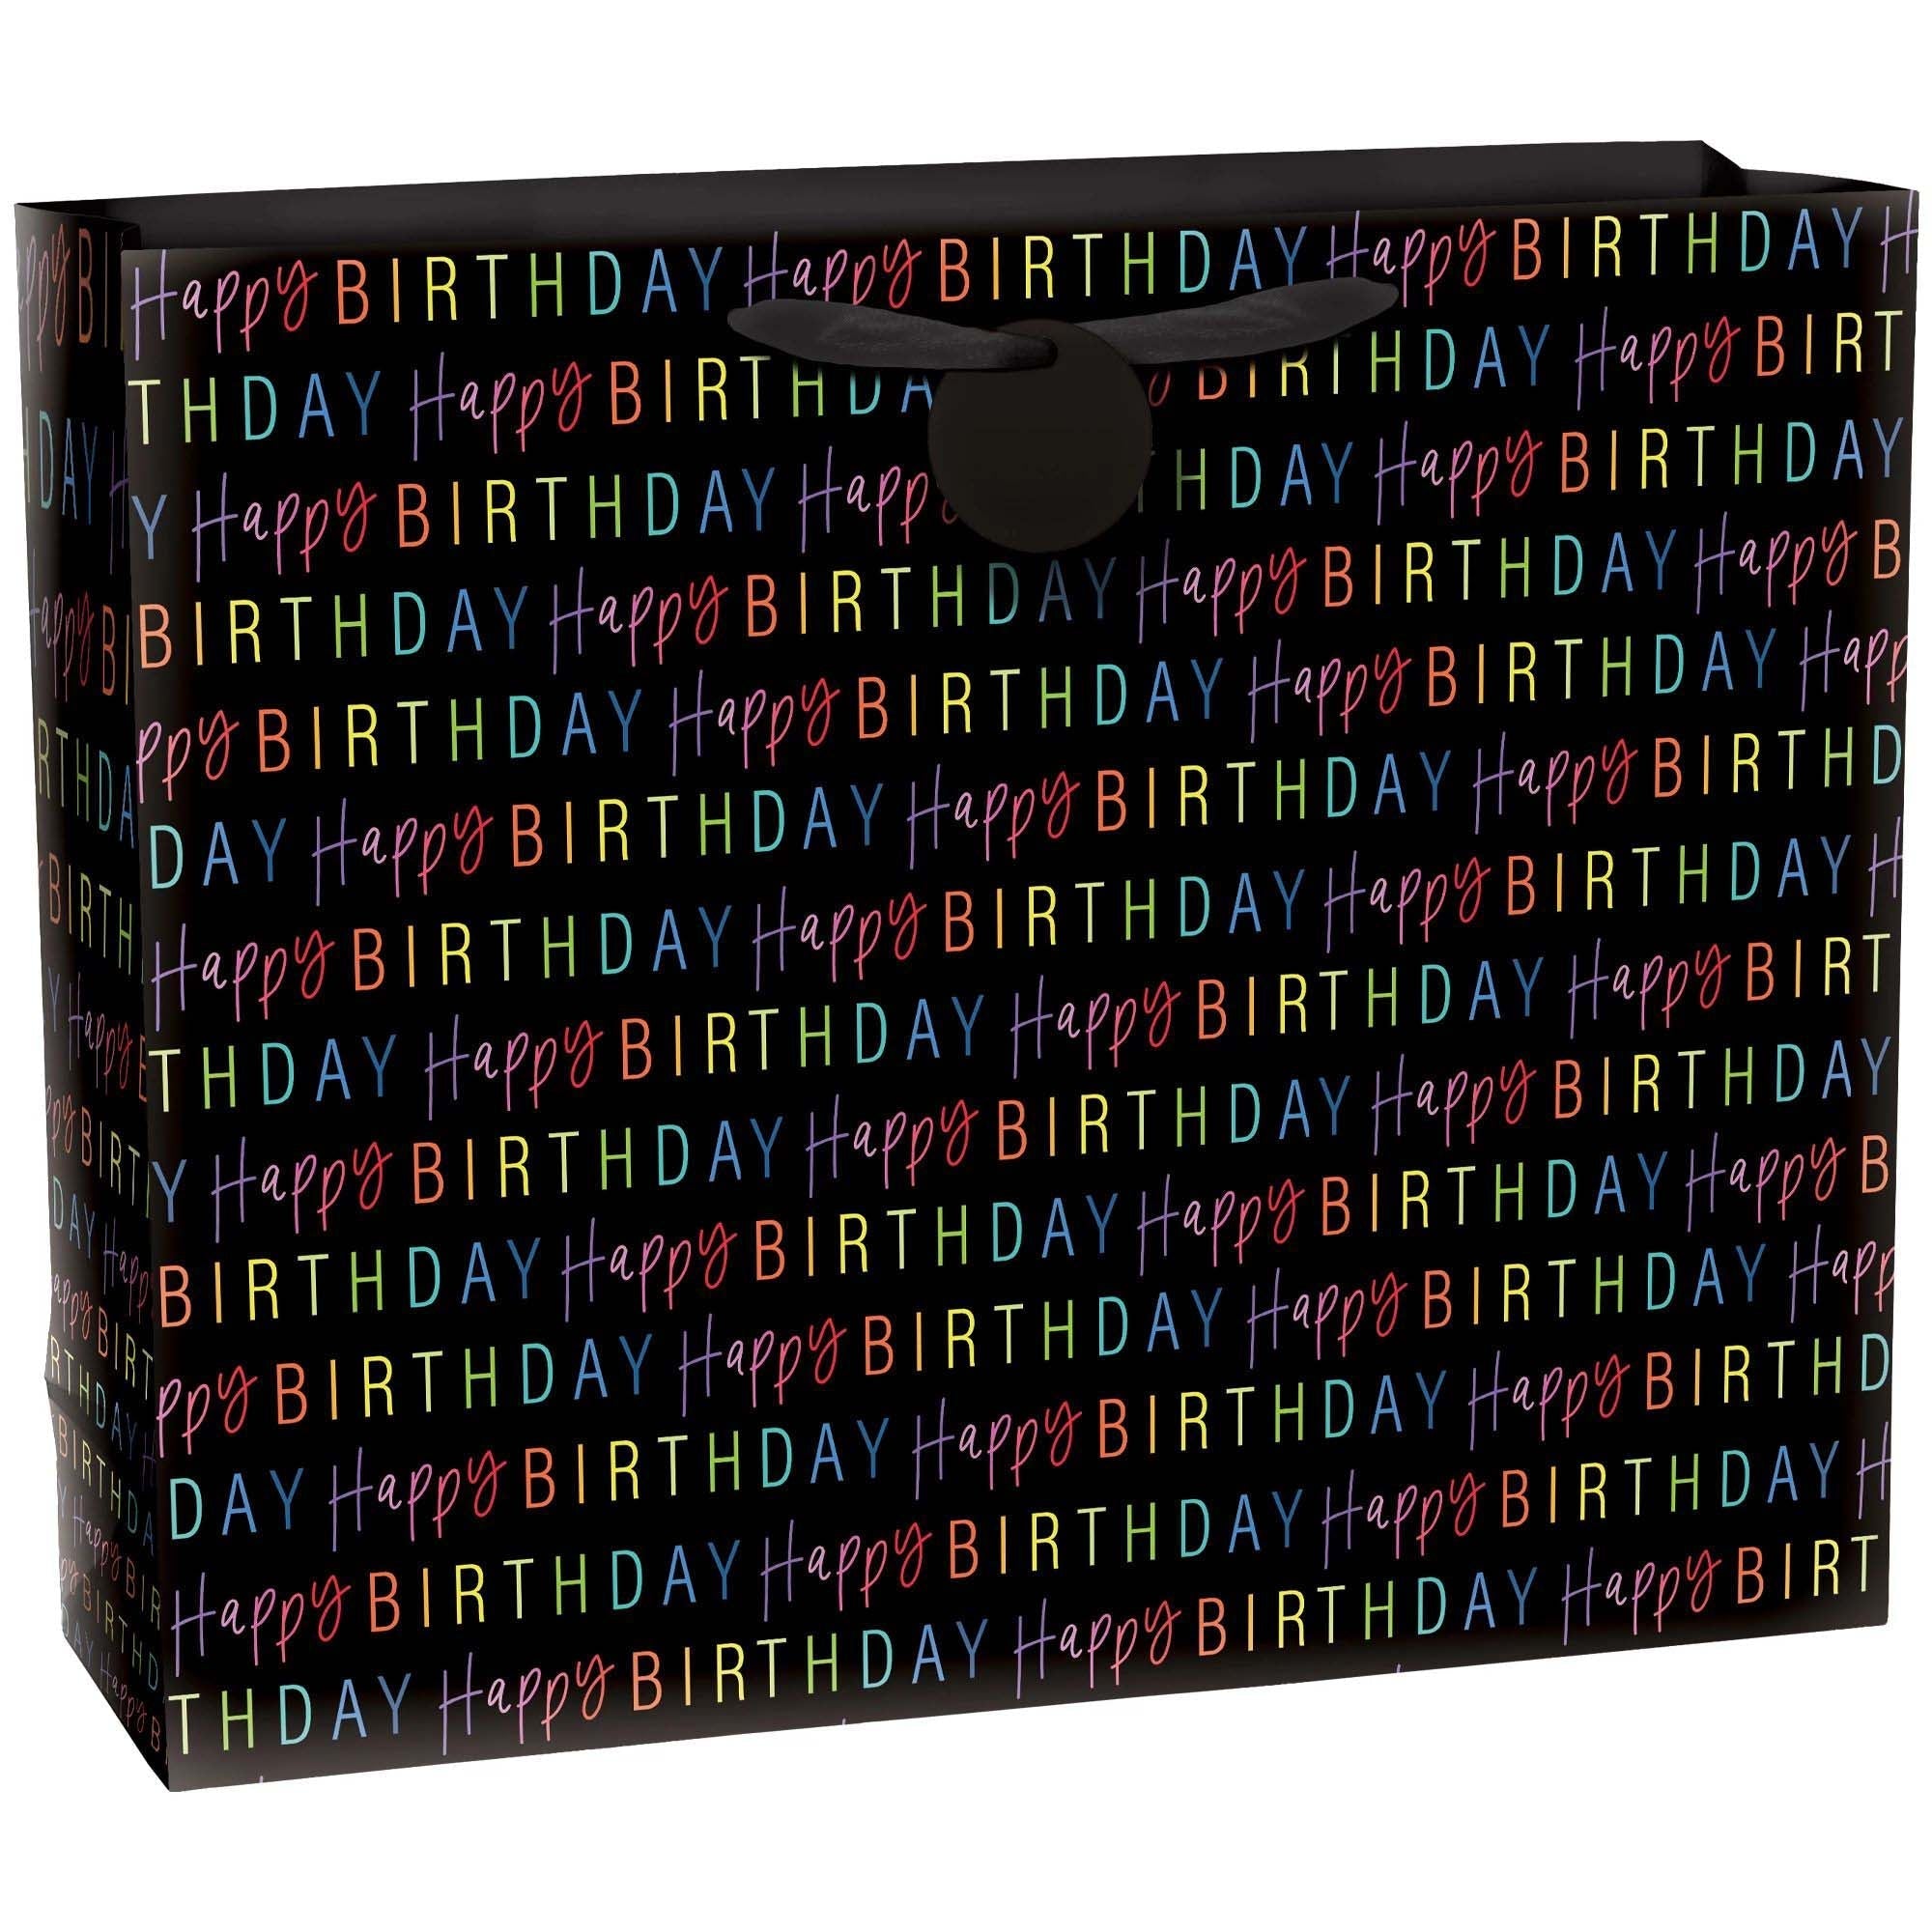 Rainbow Happy Birthday Large Gift Bag, 13 x 10.5 x 5 Inches, 1 Count